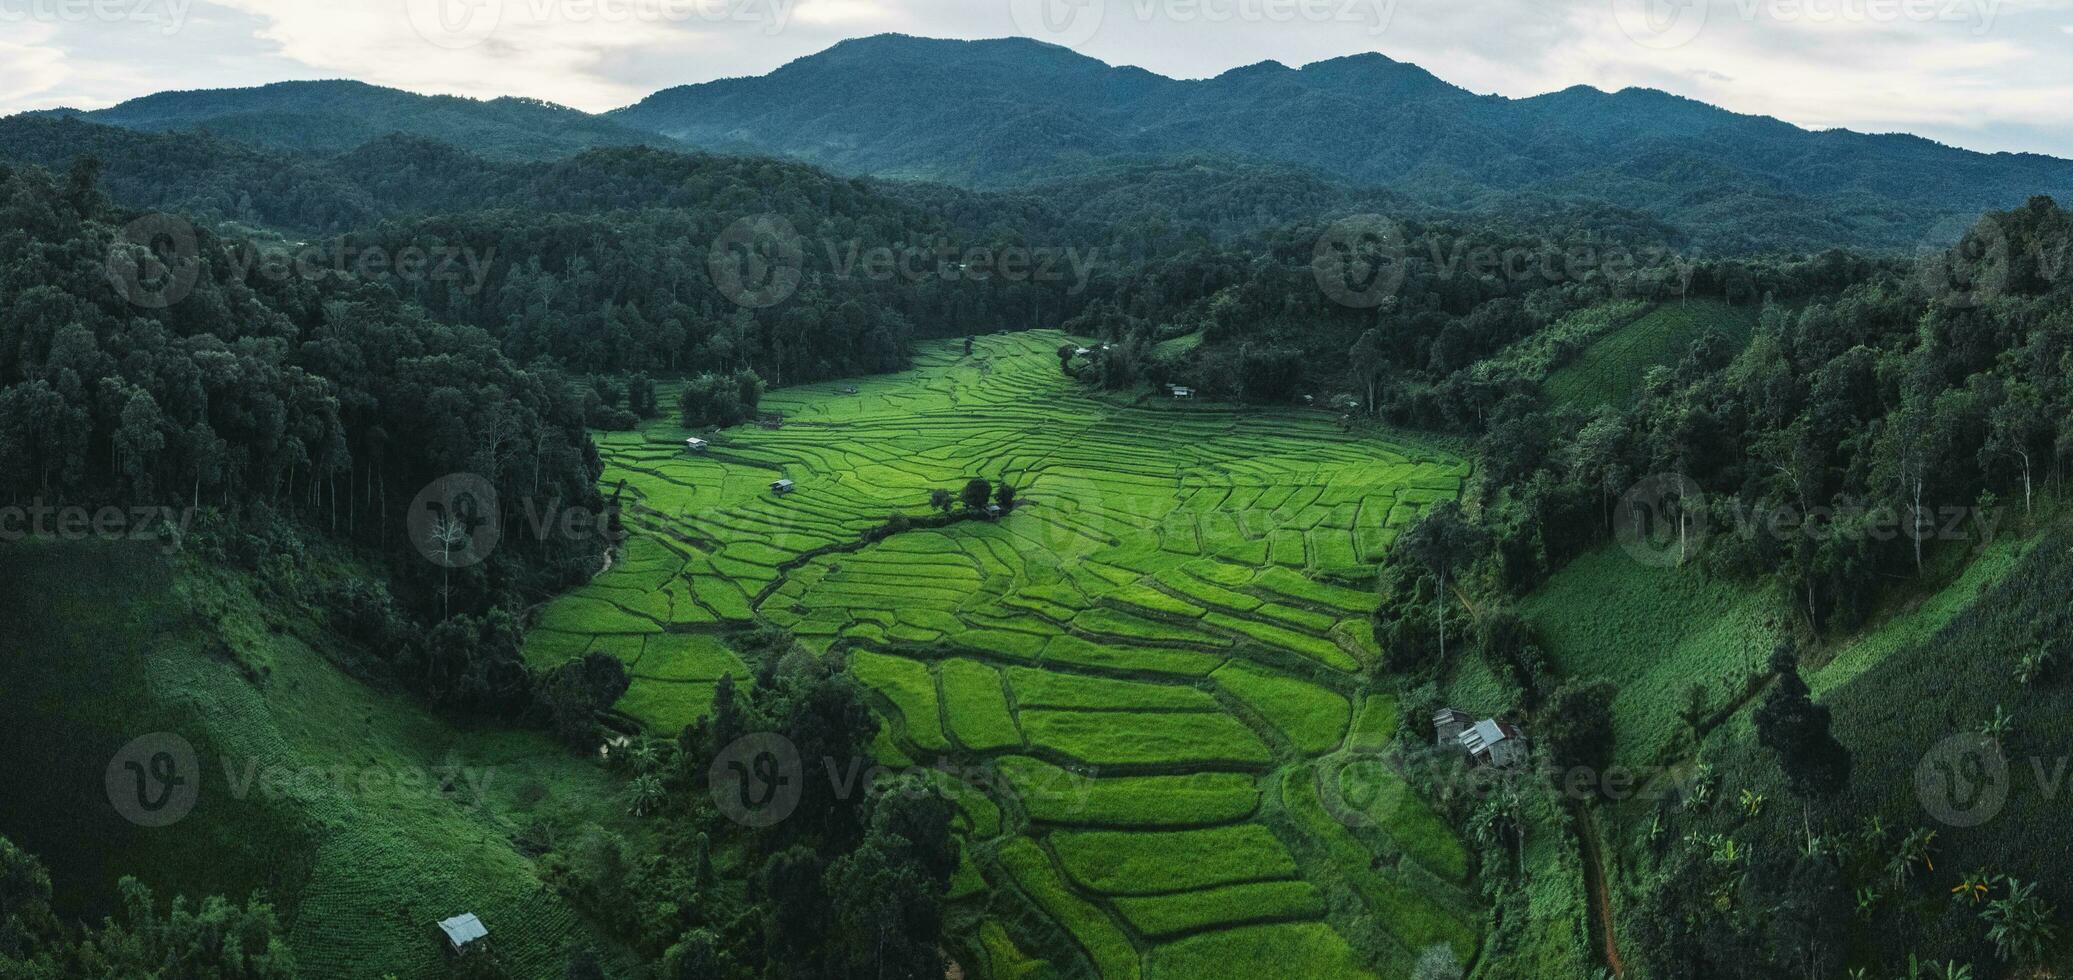 rice fields at dusk in the countryside photo